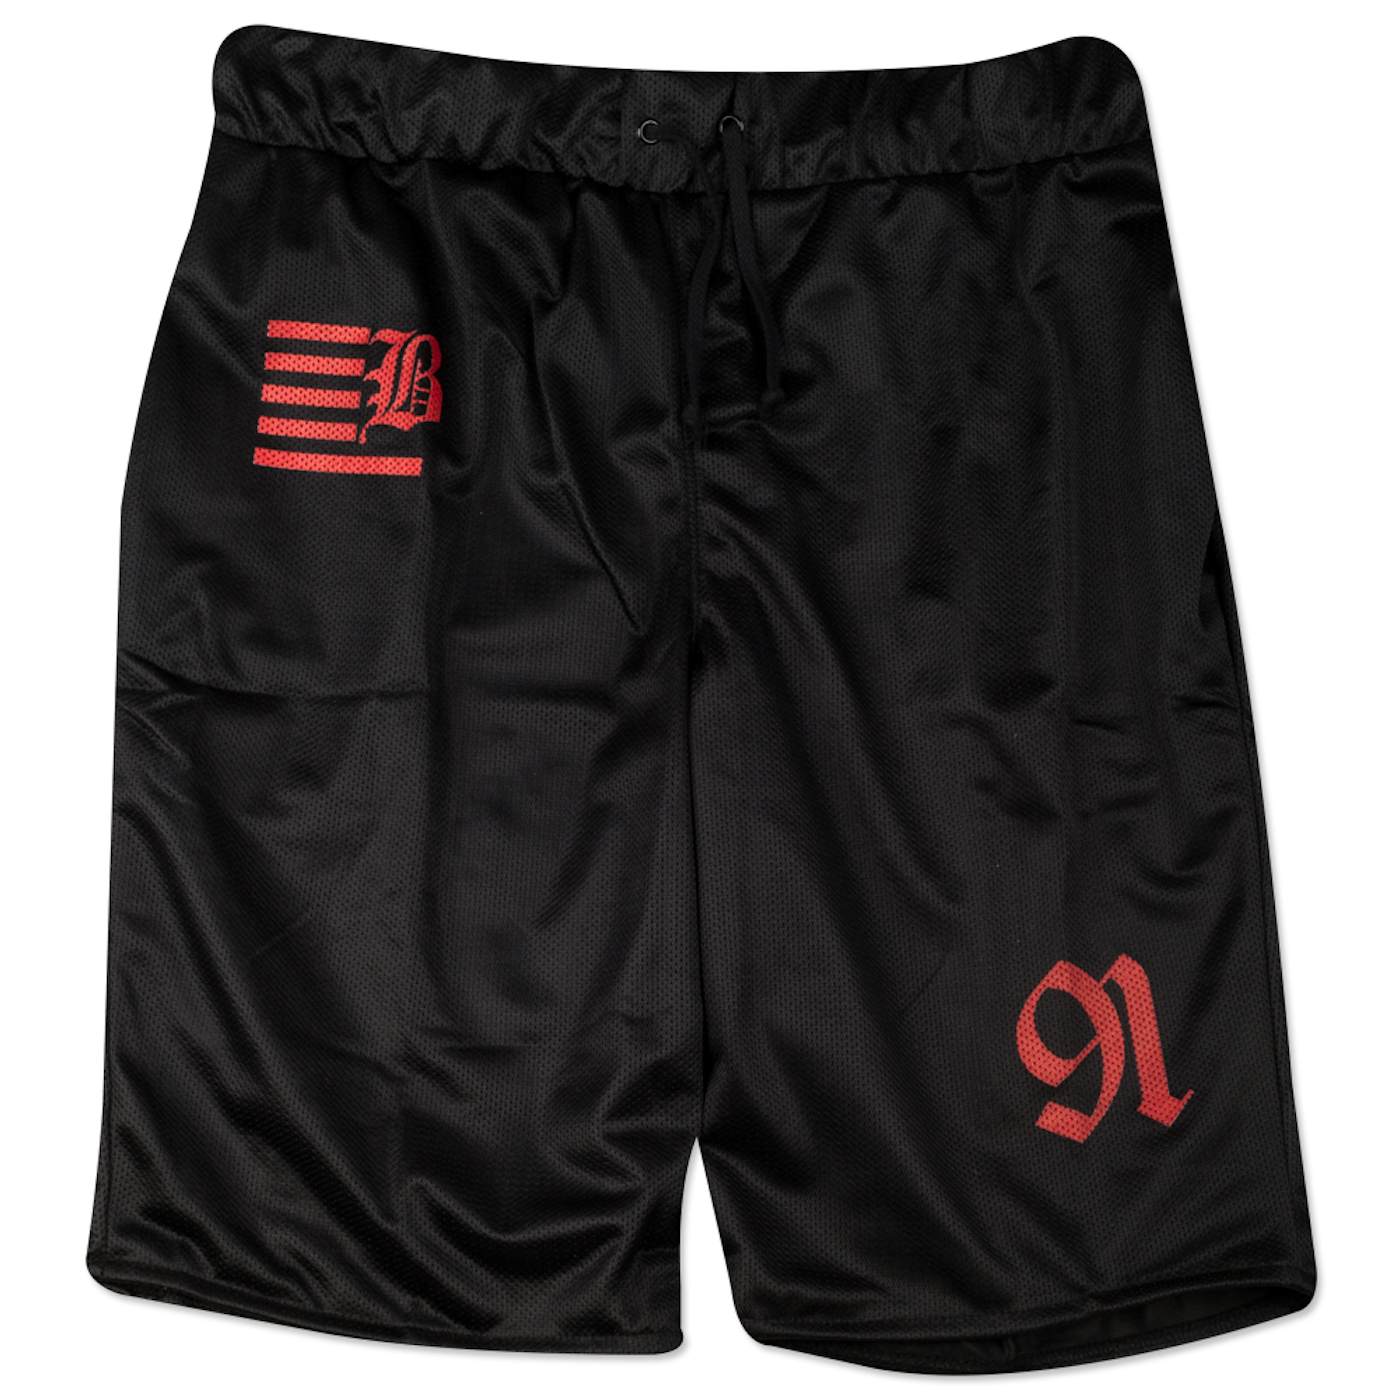 YMCMB Beed Up Shorts